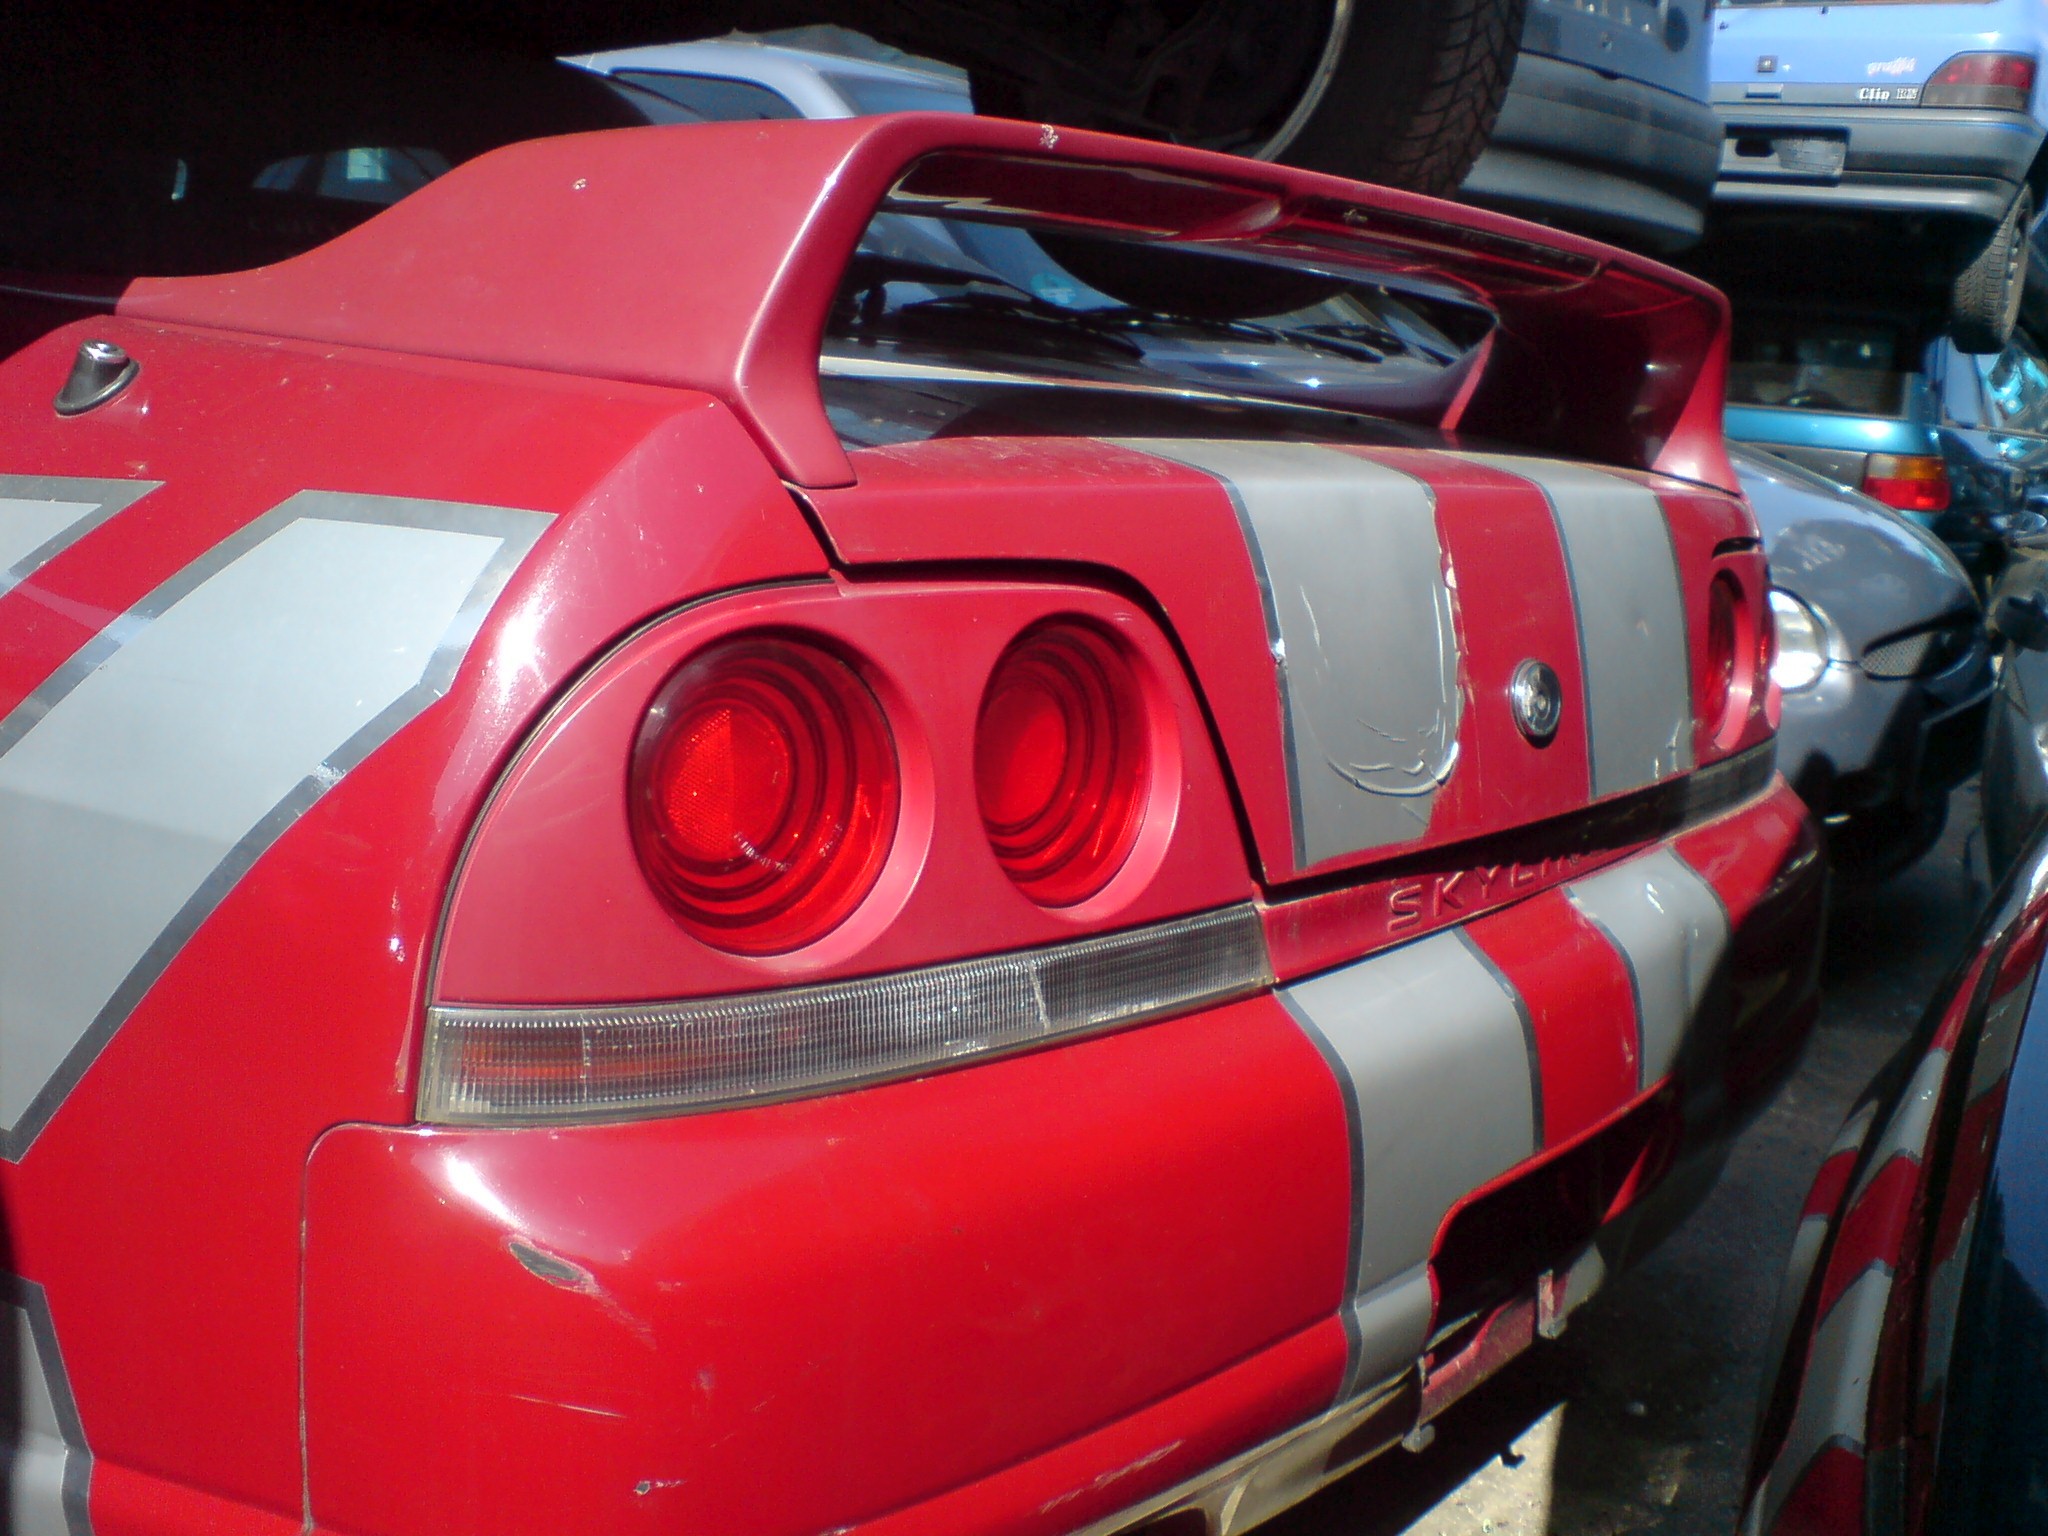 An Almost Complete Fast & Furious R33 Skyline ends on a Junkyard in rural Germany